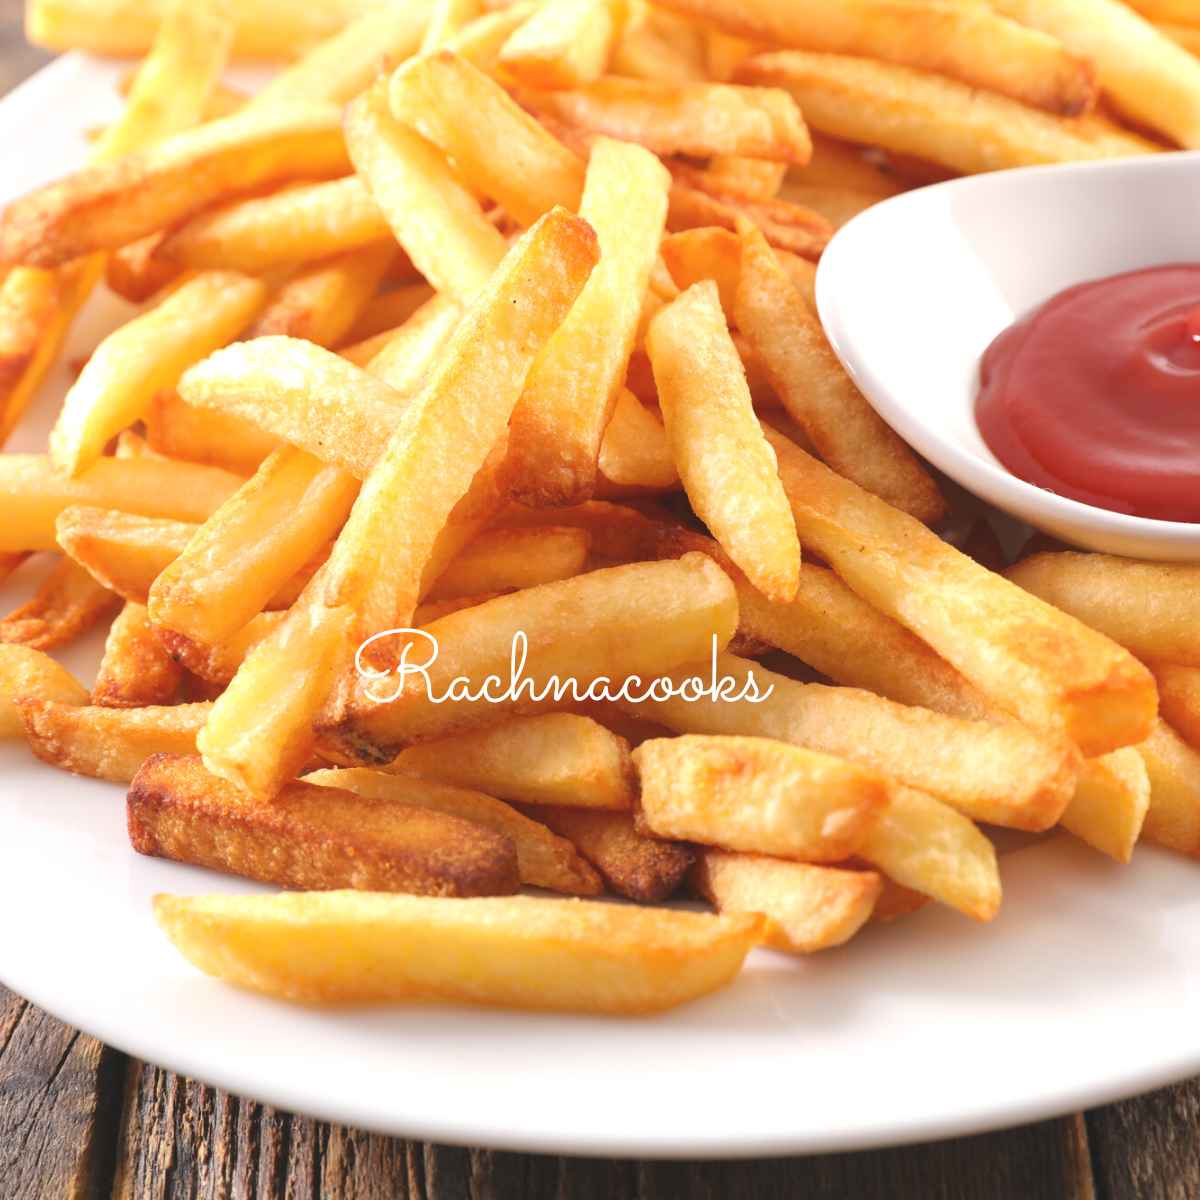 A plate full of air fried french fries served with ketchup